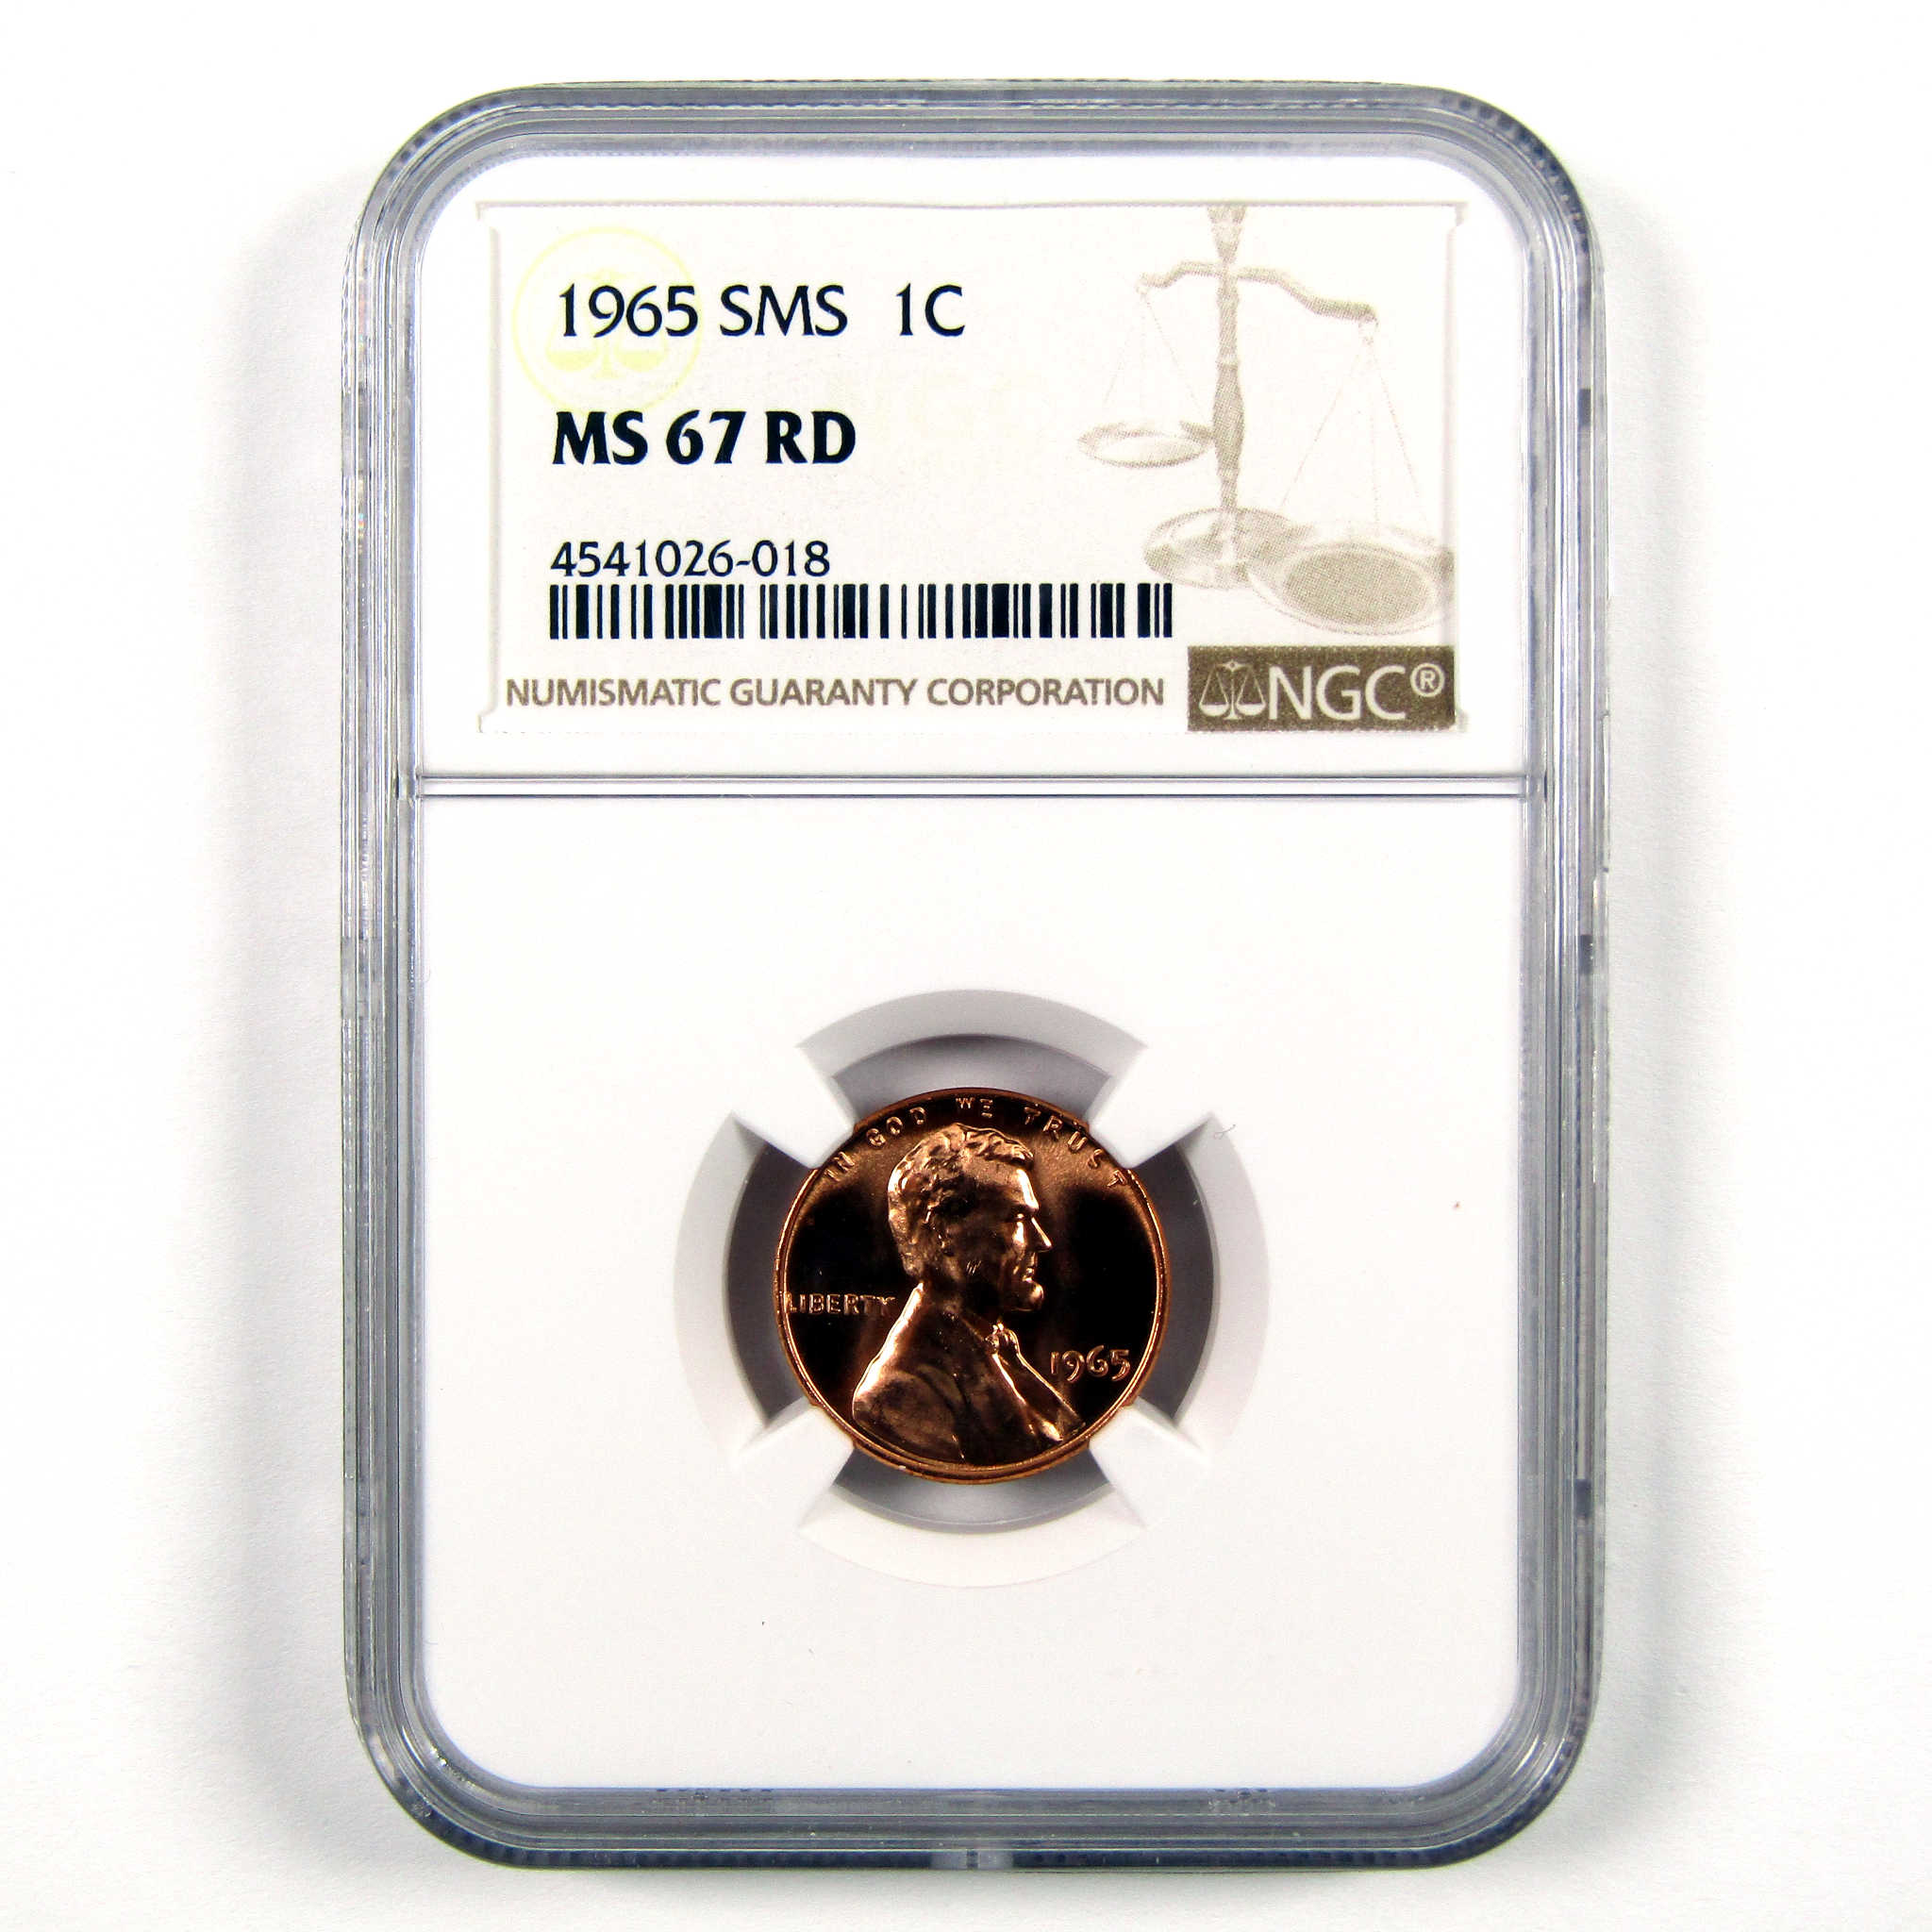 1965 SMS Lincoln Memorial Cent MS 67 RD NGC Penny 1c Unc SKU:CPC6036